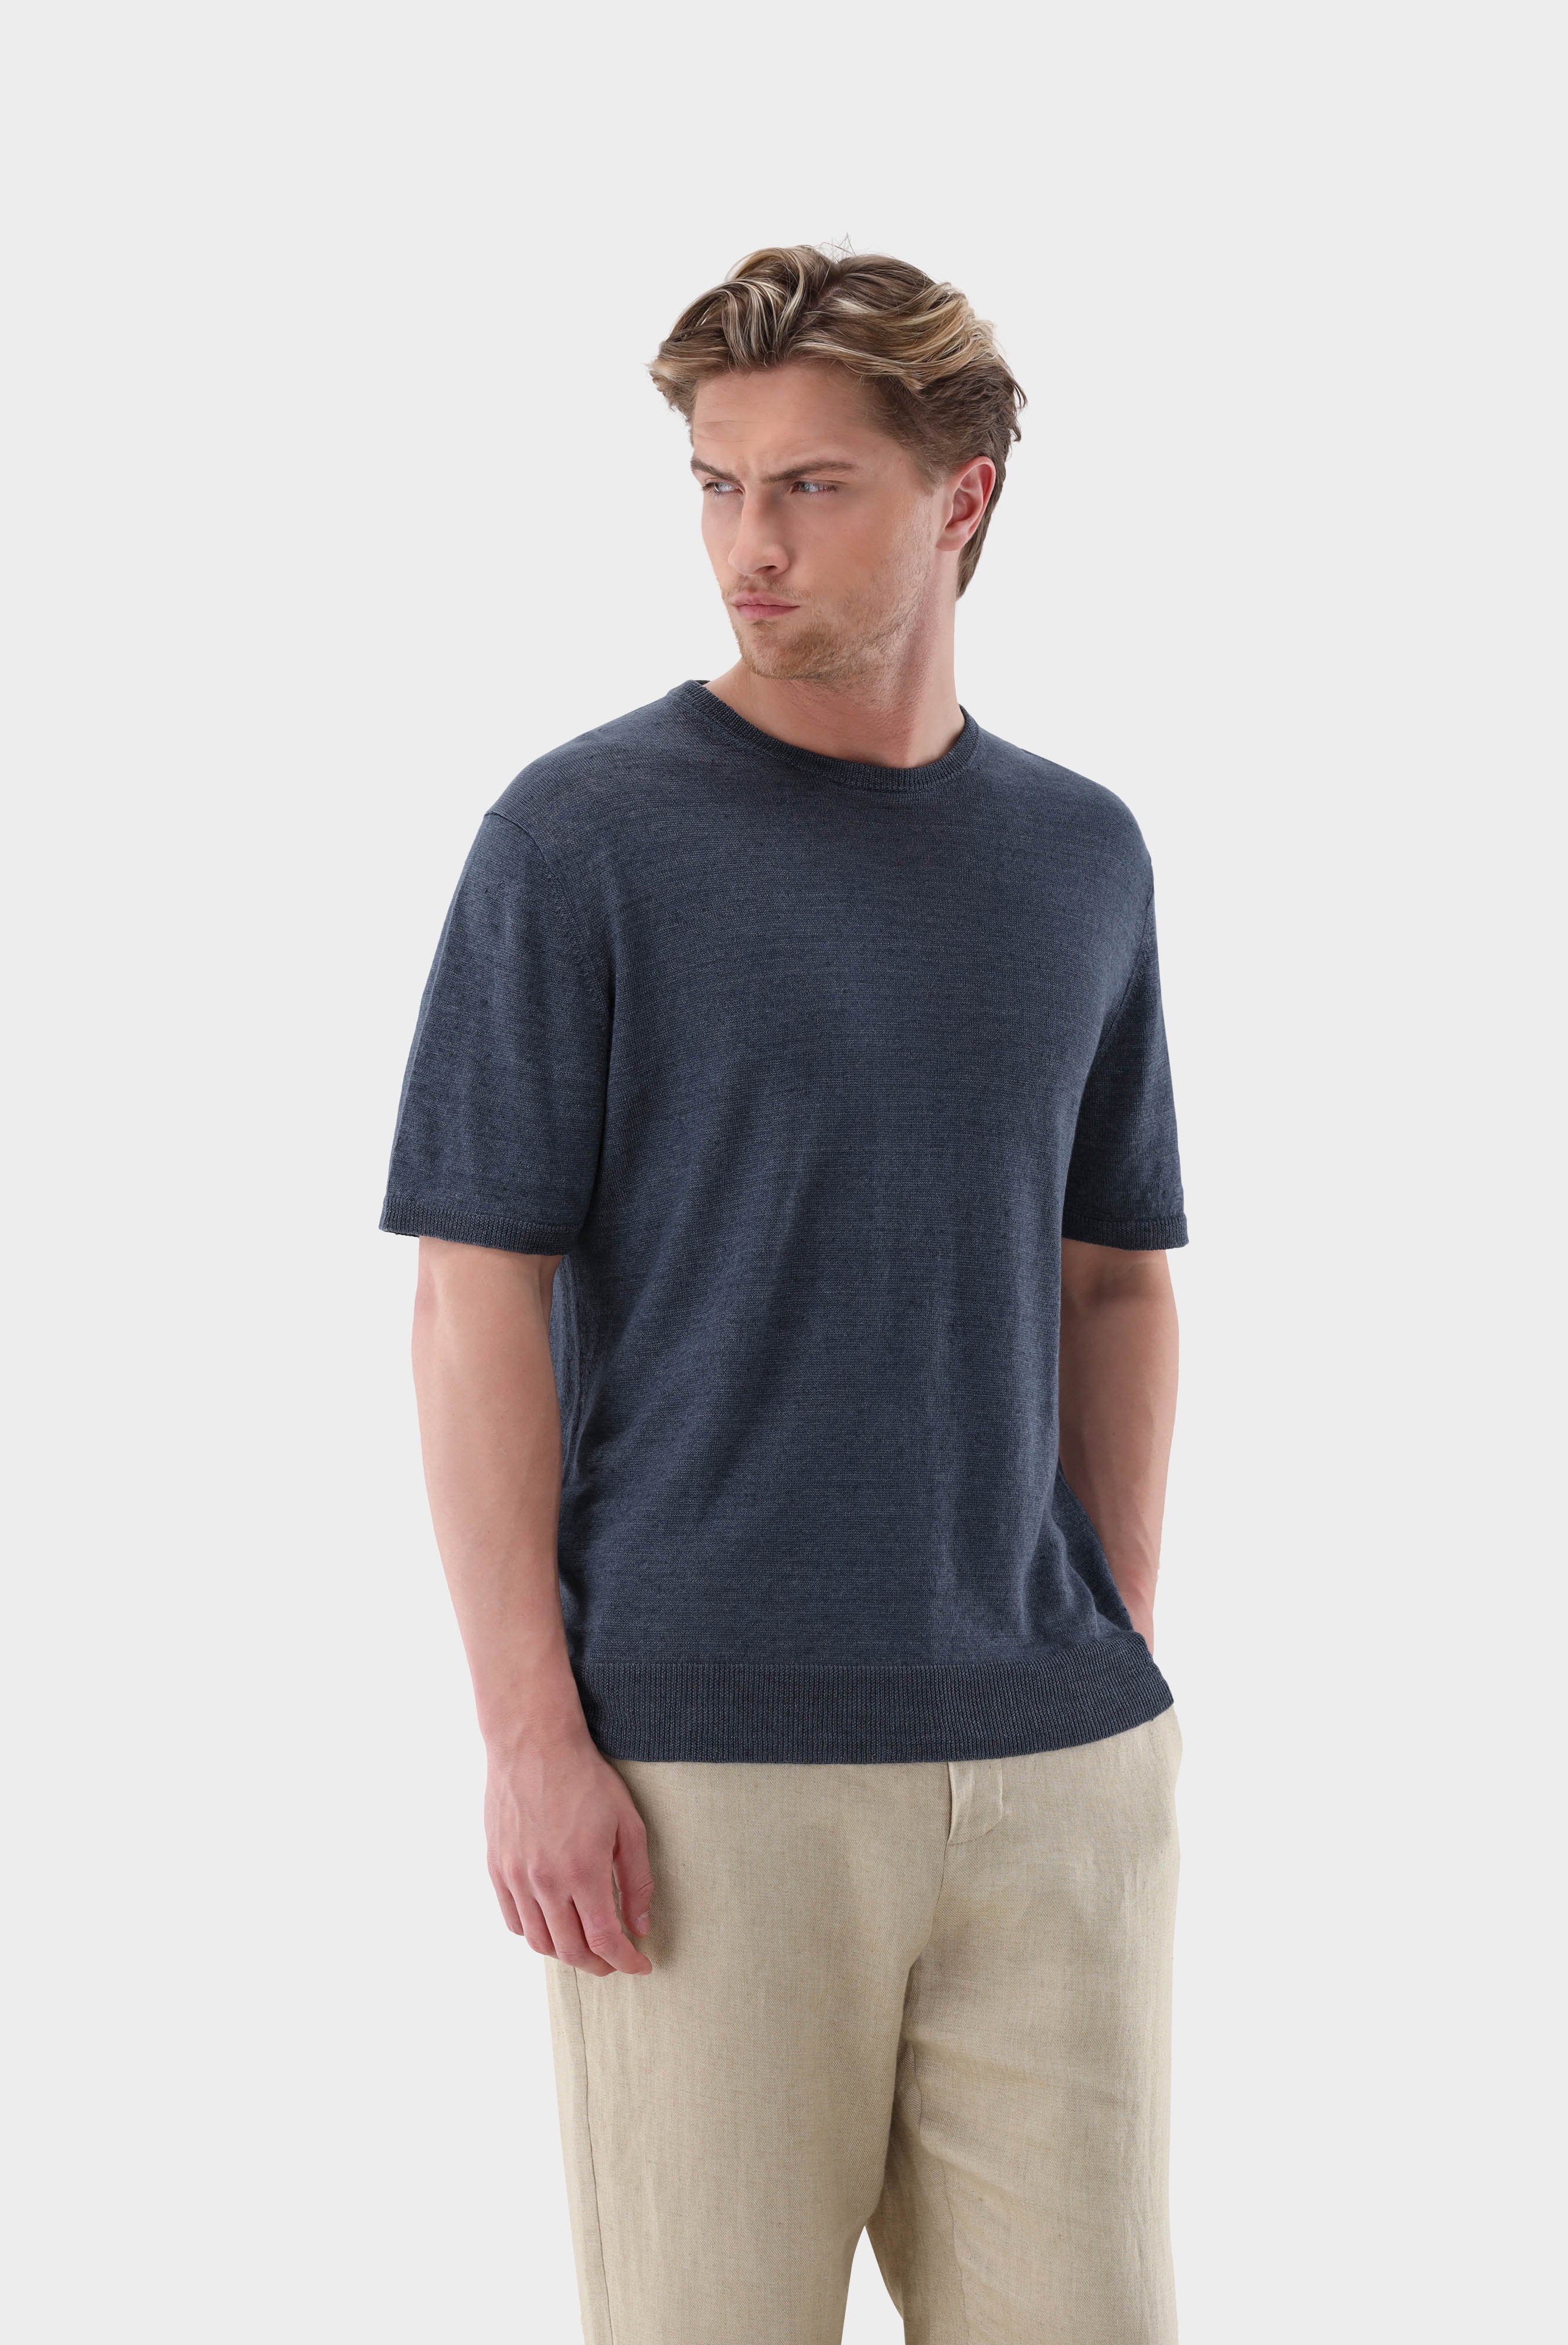 Sweaters & Cardigans+Knit T-Shirt in Linen+82.8650..S00169.760.L